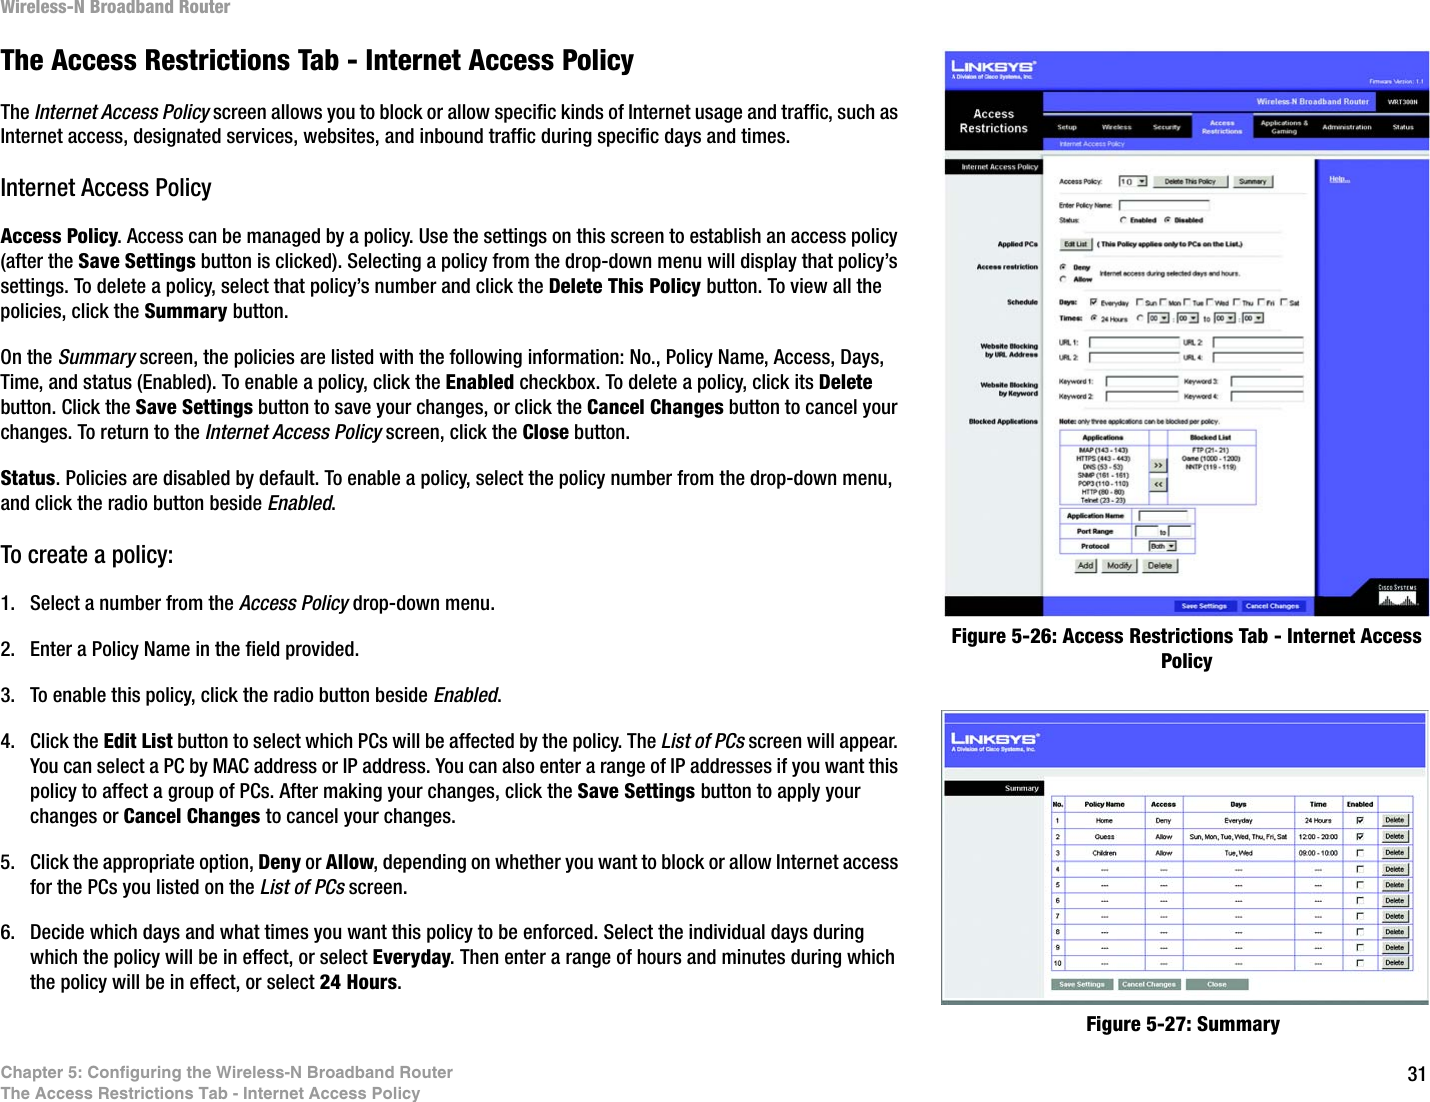 31Chapter 5: Configuring the Wireless-N Broadband RouterThe Access Restrictions Tab - Internet Access PolicyWireless-N Broadband RouterThe Access Restrictions Tab - Internet Access PolicyThe Internet Access Policy screen allows you to block or allow specific kinds of Internet usage and traffic, such as Internet access, designated services, websites, and inbound traffic during specific days and times.Internet Access PolicyAccess Policy. Access can be managed by a policy. Use the settings on this screen to establish an access policy (after the Save Settings button is clicked). Selecting a policy from the drop-down menu will display that policy’s settings. To delete a policy, select that policy’s number and click the Delete This Policy button. To view all the policies, click the Summary button. On the Summary screen, the policies are listed with the following information: No., Policy Name, Access, Days, Time, and status (Enabled). To enable a policy, click the Enabled checkbox. To delete a policy, click its Delete button. Click the Save Settings button to save your changes, or click the Cancel Changes button to cancel your changes. To return to the Internet Access Policy screen, click the Close button. Status. Policies are disabled by default. To enable a policy, select the policy number from the drop-down menu, and click the radio button beside Enabled.To create a policy:1. Select a number from the Access Policy drop-down menu.2. Enter a Policy Name in the field provided.3. To enable this policy, click the radio button beside Enabled.4. Click the Edit List button to select which PCs will be affected by the policy. The List of PCs screen will appear. You can select a PC by MAC address or IP address. You can also enter a range of IP addresses if you want this policy to affect a group of PCs. After making your changes, click the Save Settings button to apply your changes or Cancel Changes to cancel your changes.5. Click the appropriate option, Deny or Allow, depending on whether you want to block or allow Internet access for the PCs you listed on the List of PCs screen.6. Decide which days and what times you want this policy to be enforced. Select the individual days during which the policy will be in effect, or select Everyday. Then enter a range of hours and minutes during which the policy will be in effect, or select 24 Hours.Figure 5-26: Access Restrictions Tab - Internet Access PolicyFigure 5-27: Summary